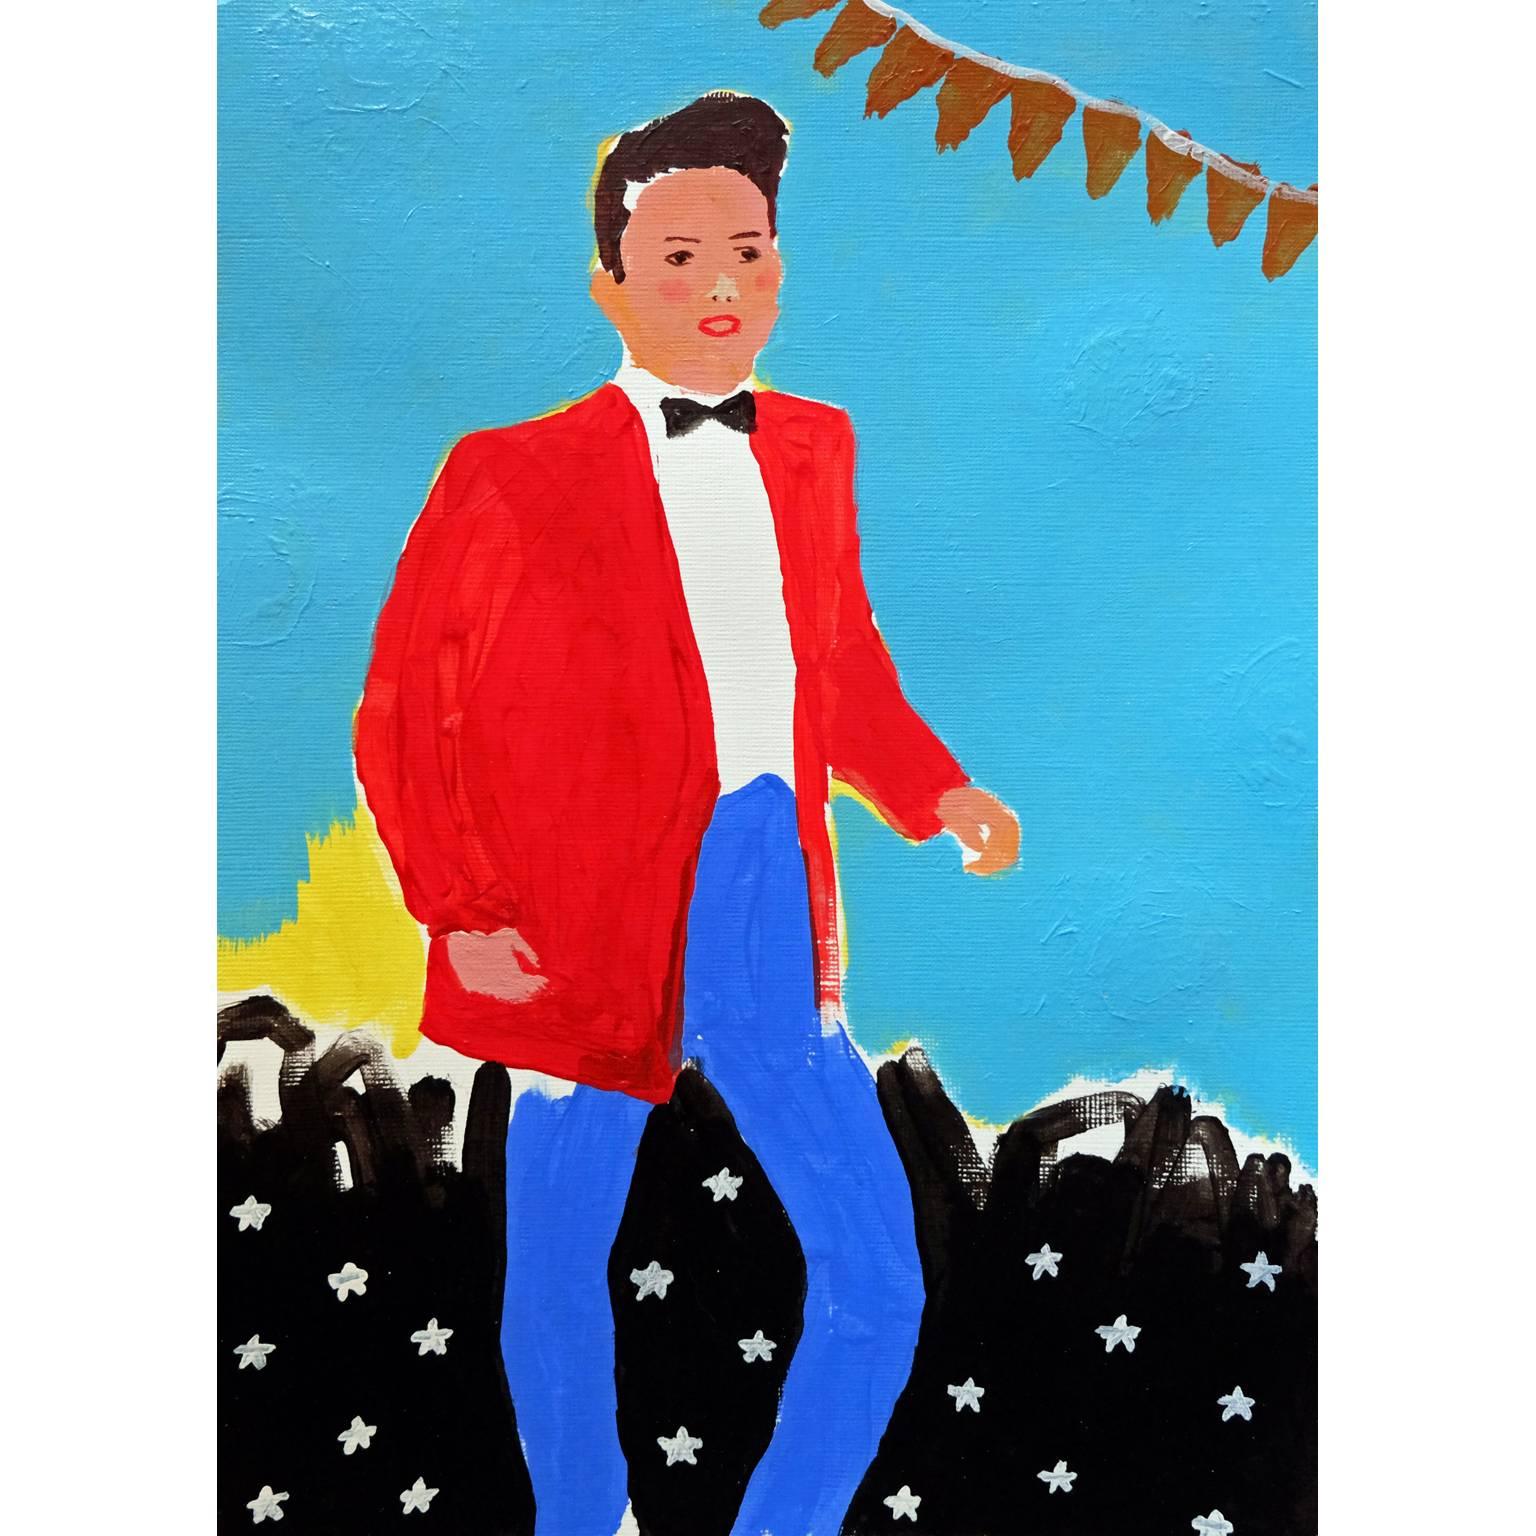 'The Virgin Shuffle' Portrait Painting by Alan Fears Acrylic on Paper Dancing